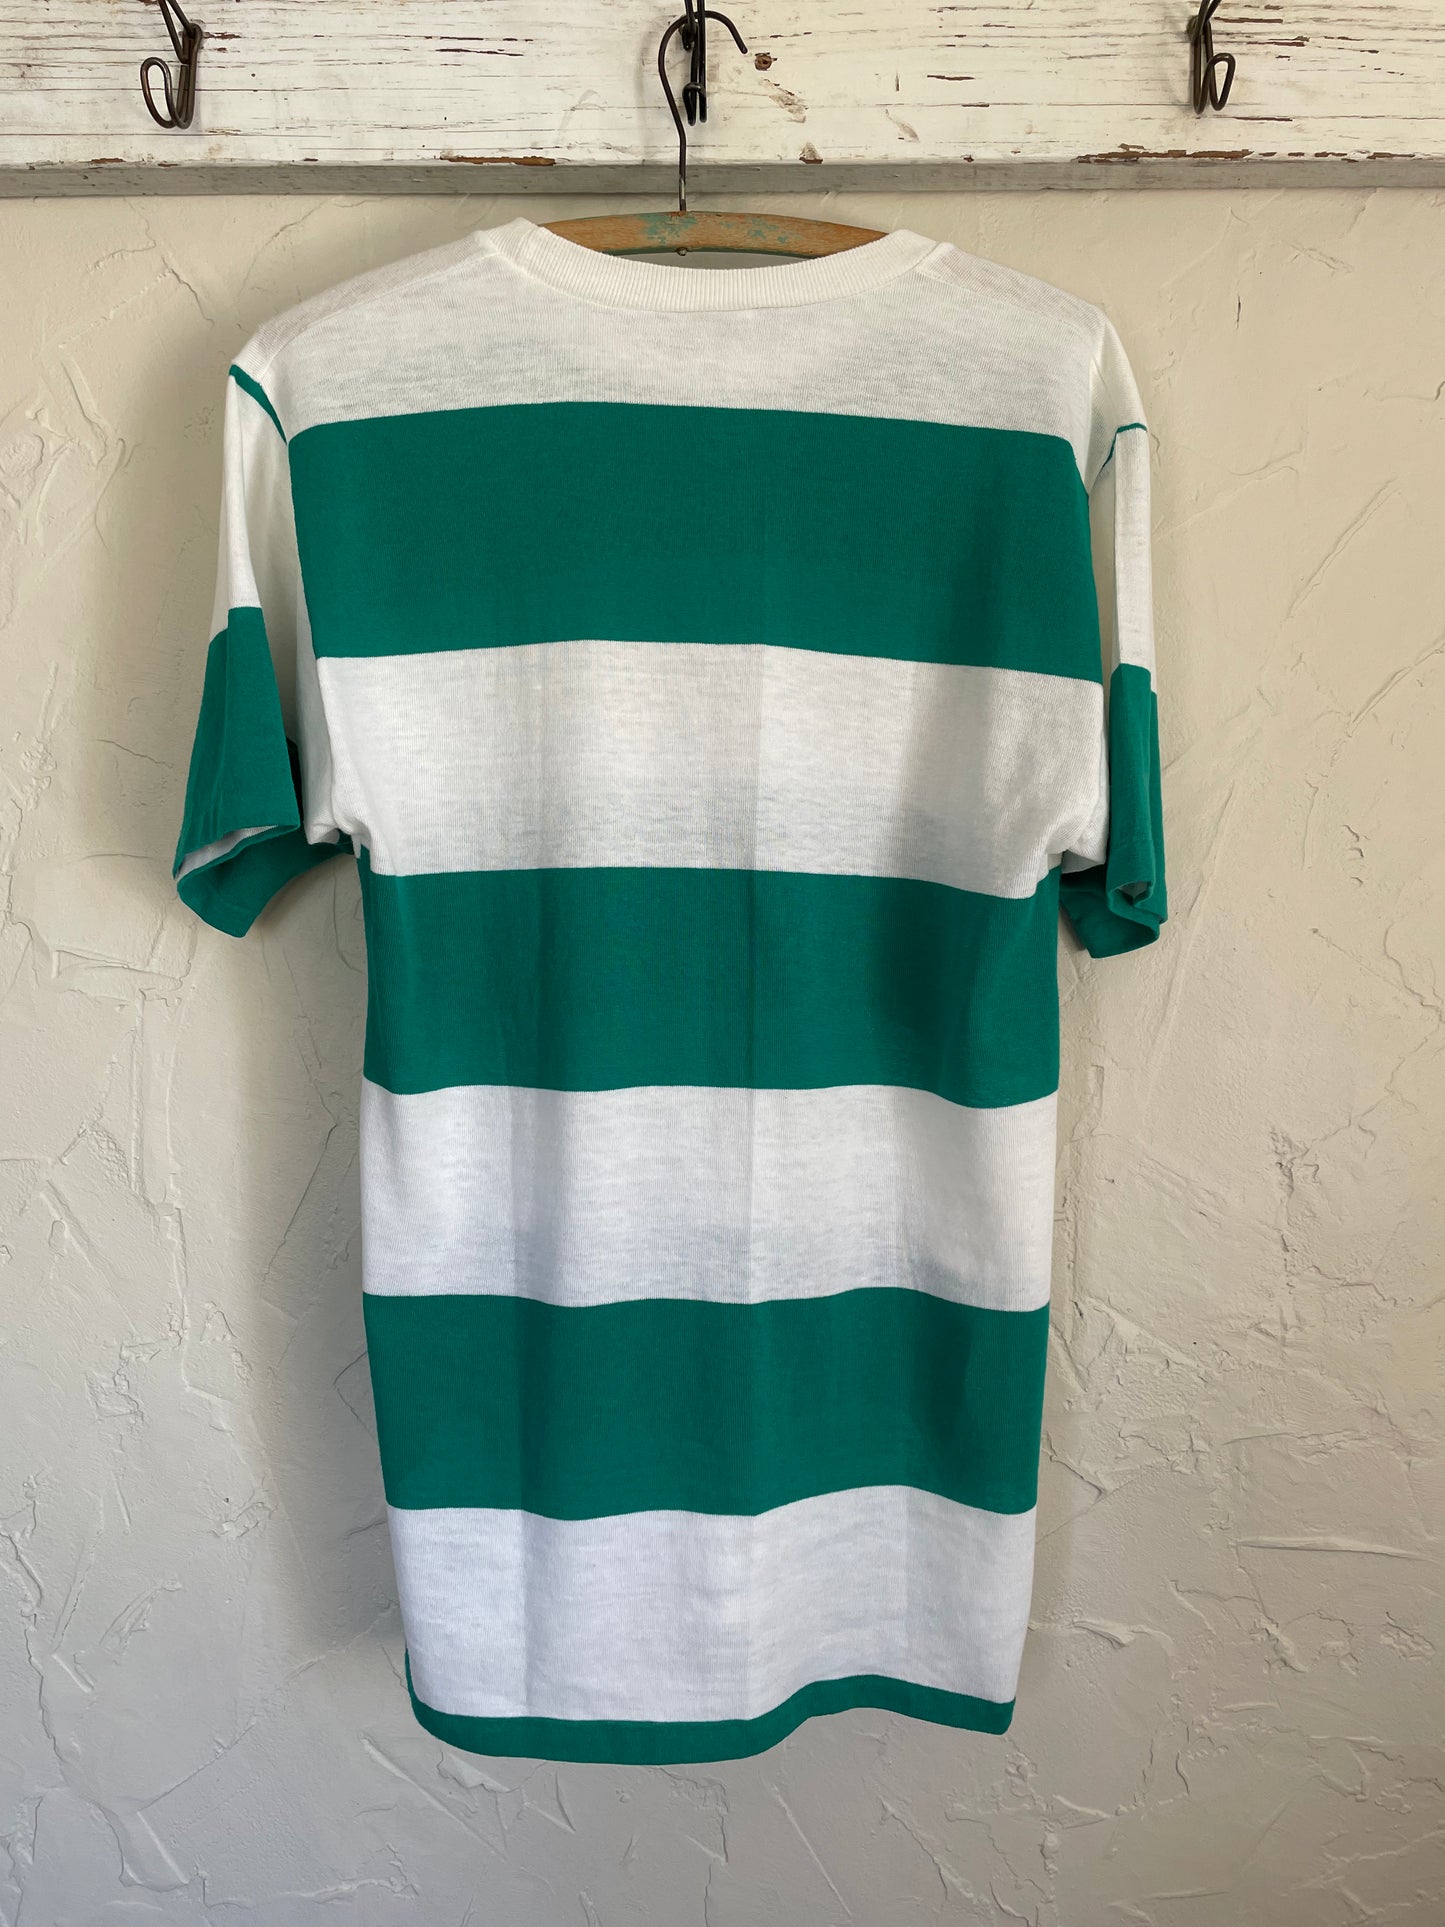 80s Green and White Striped Tee